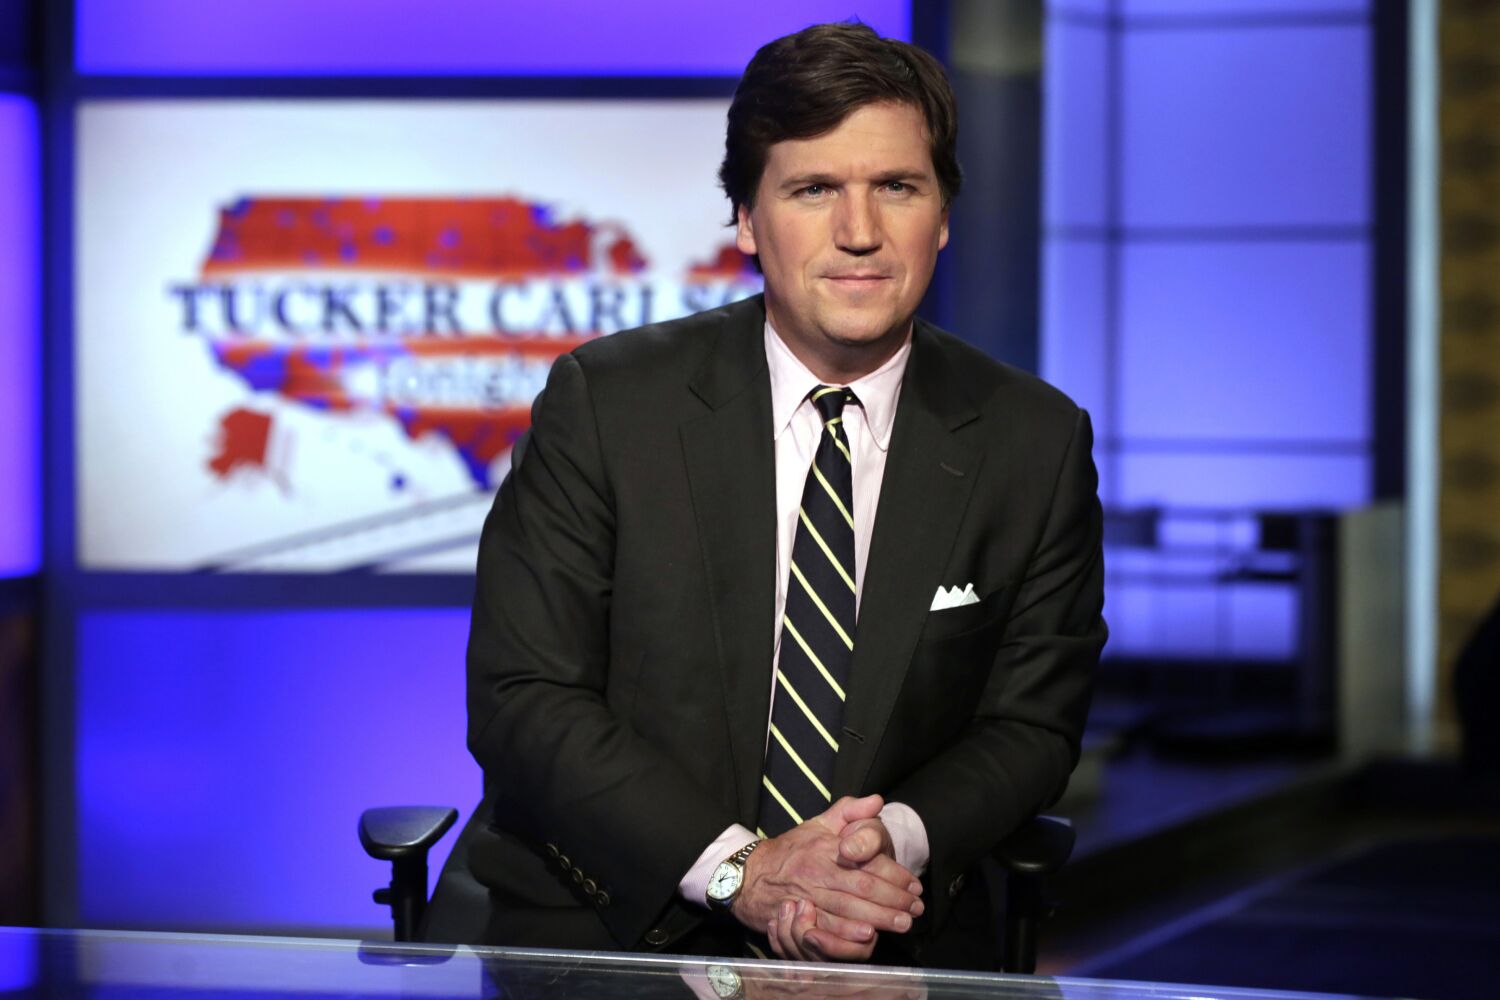 Twitter rejoices as Tucker Carlson leaves Fox News: 'Don't let the door hit you'